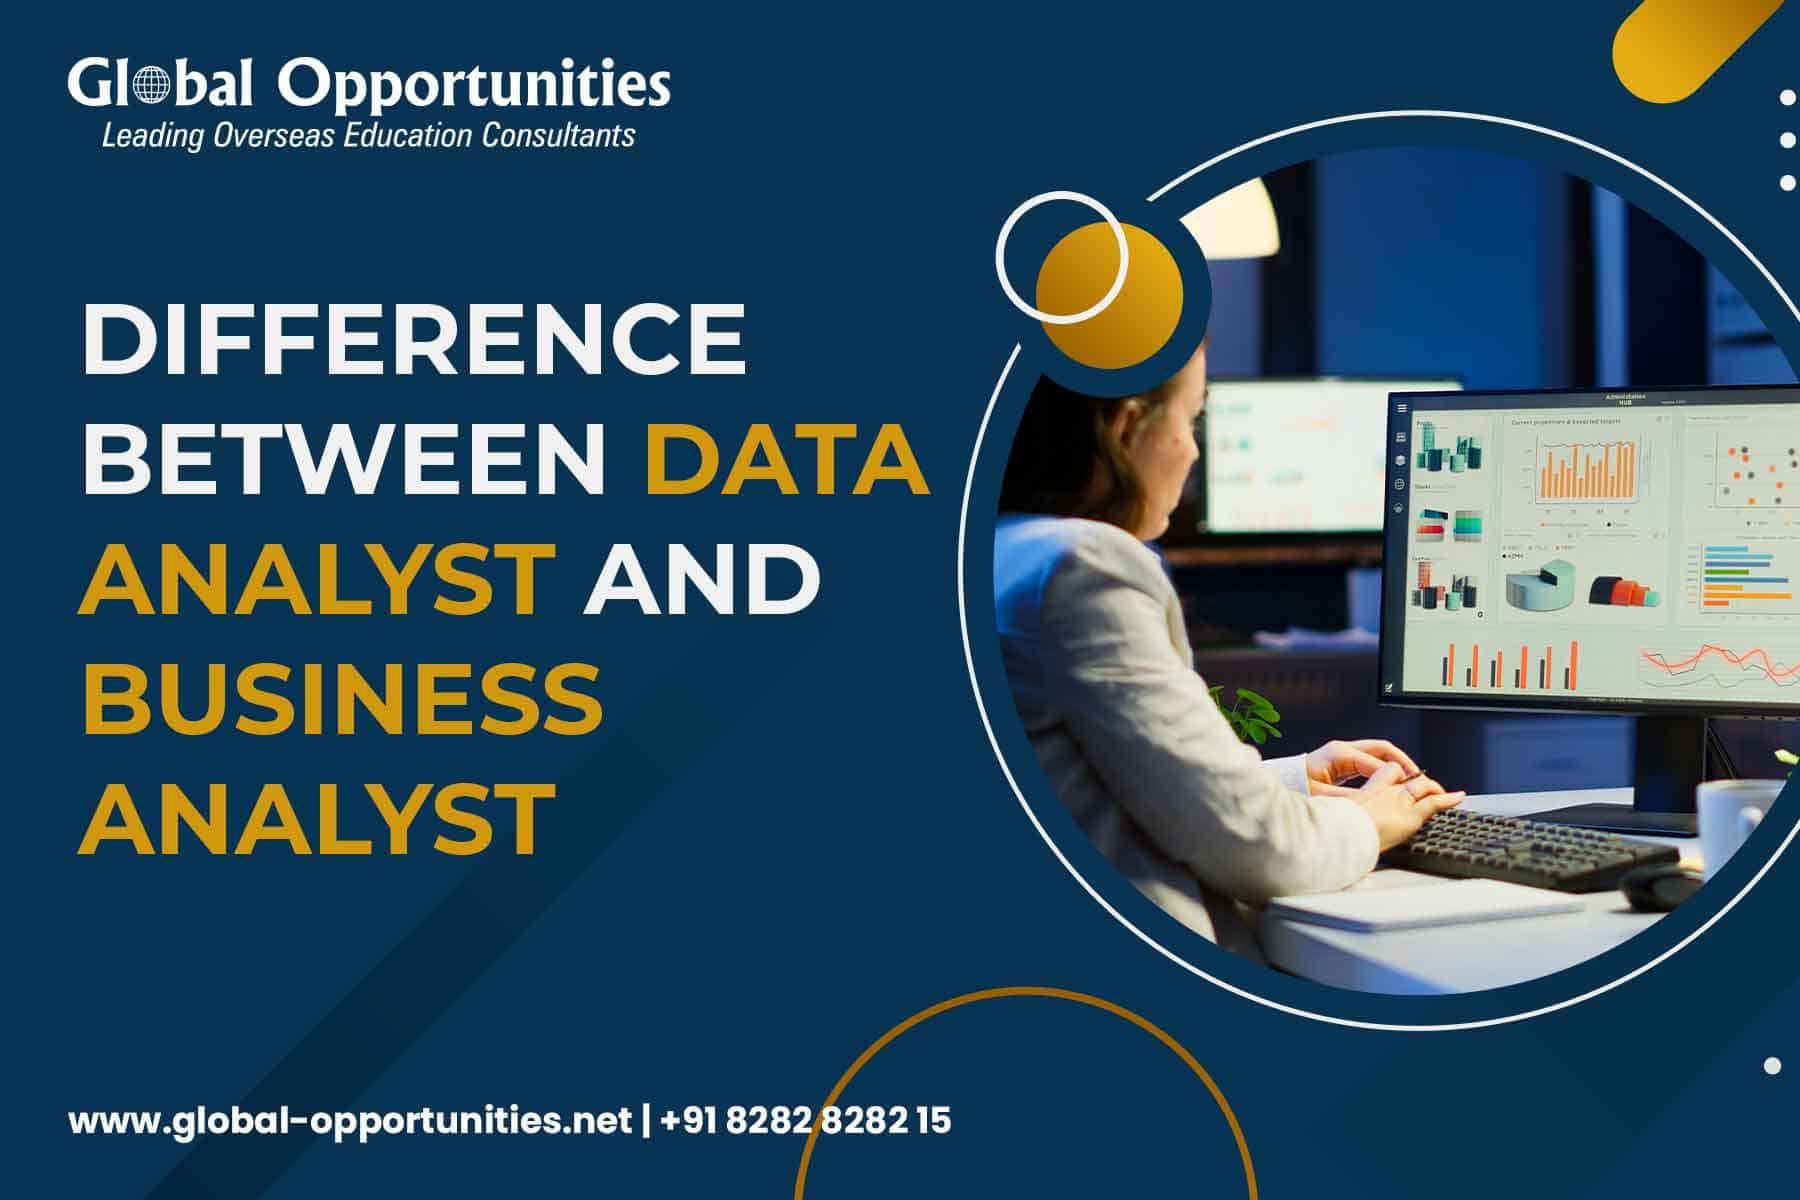 Difference between Data Analyst and Business Analyst